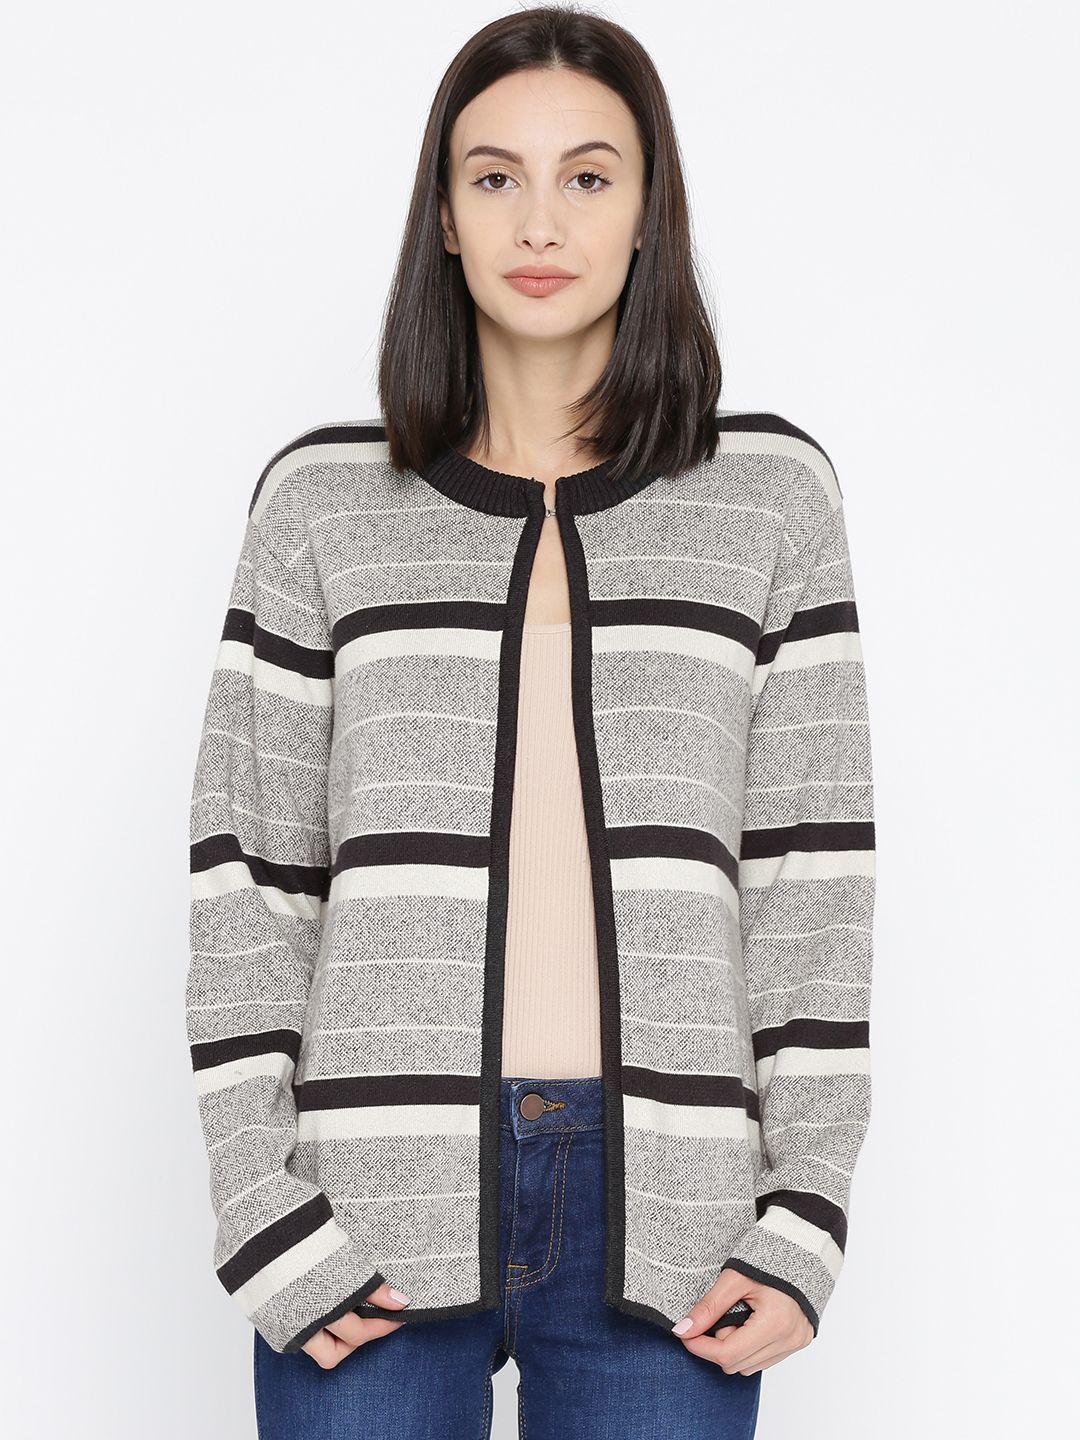 annabelle by pantaloons women grey & off-white striped cardigan